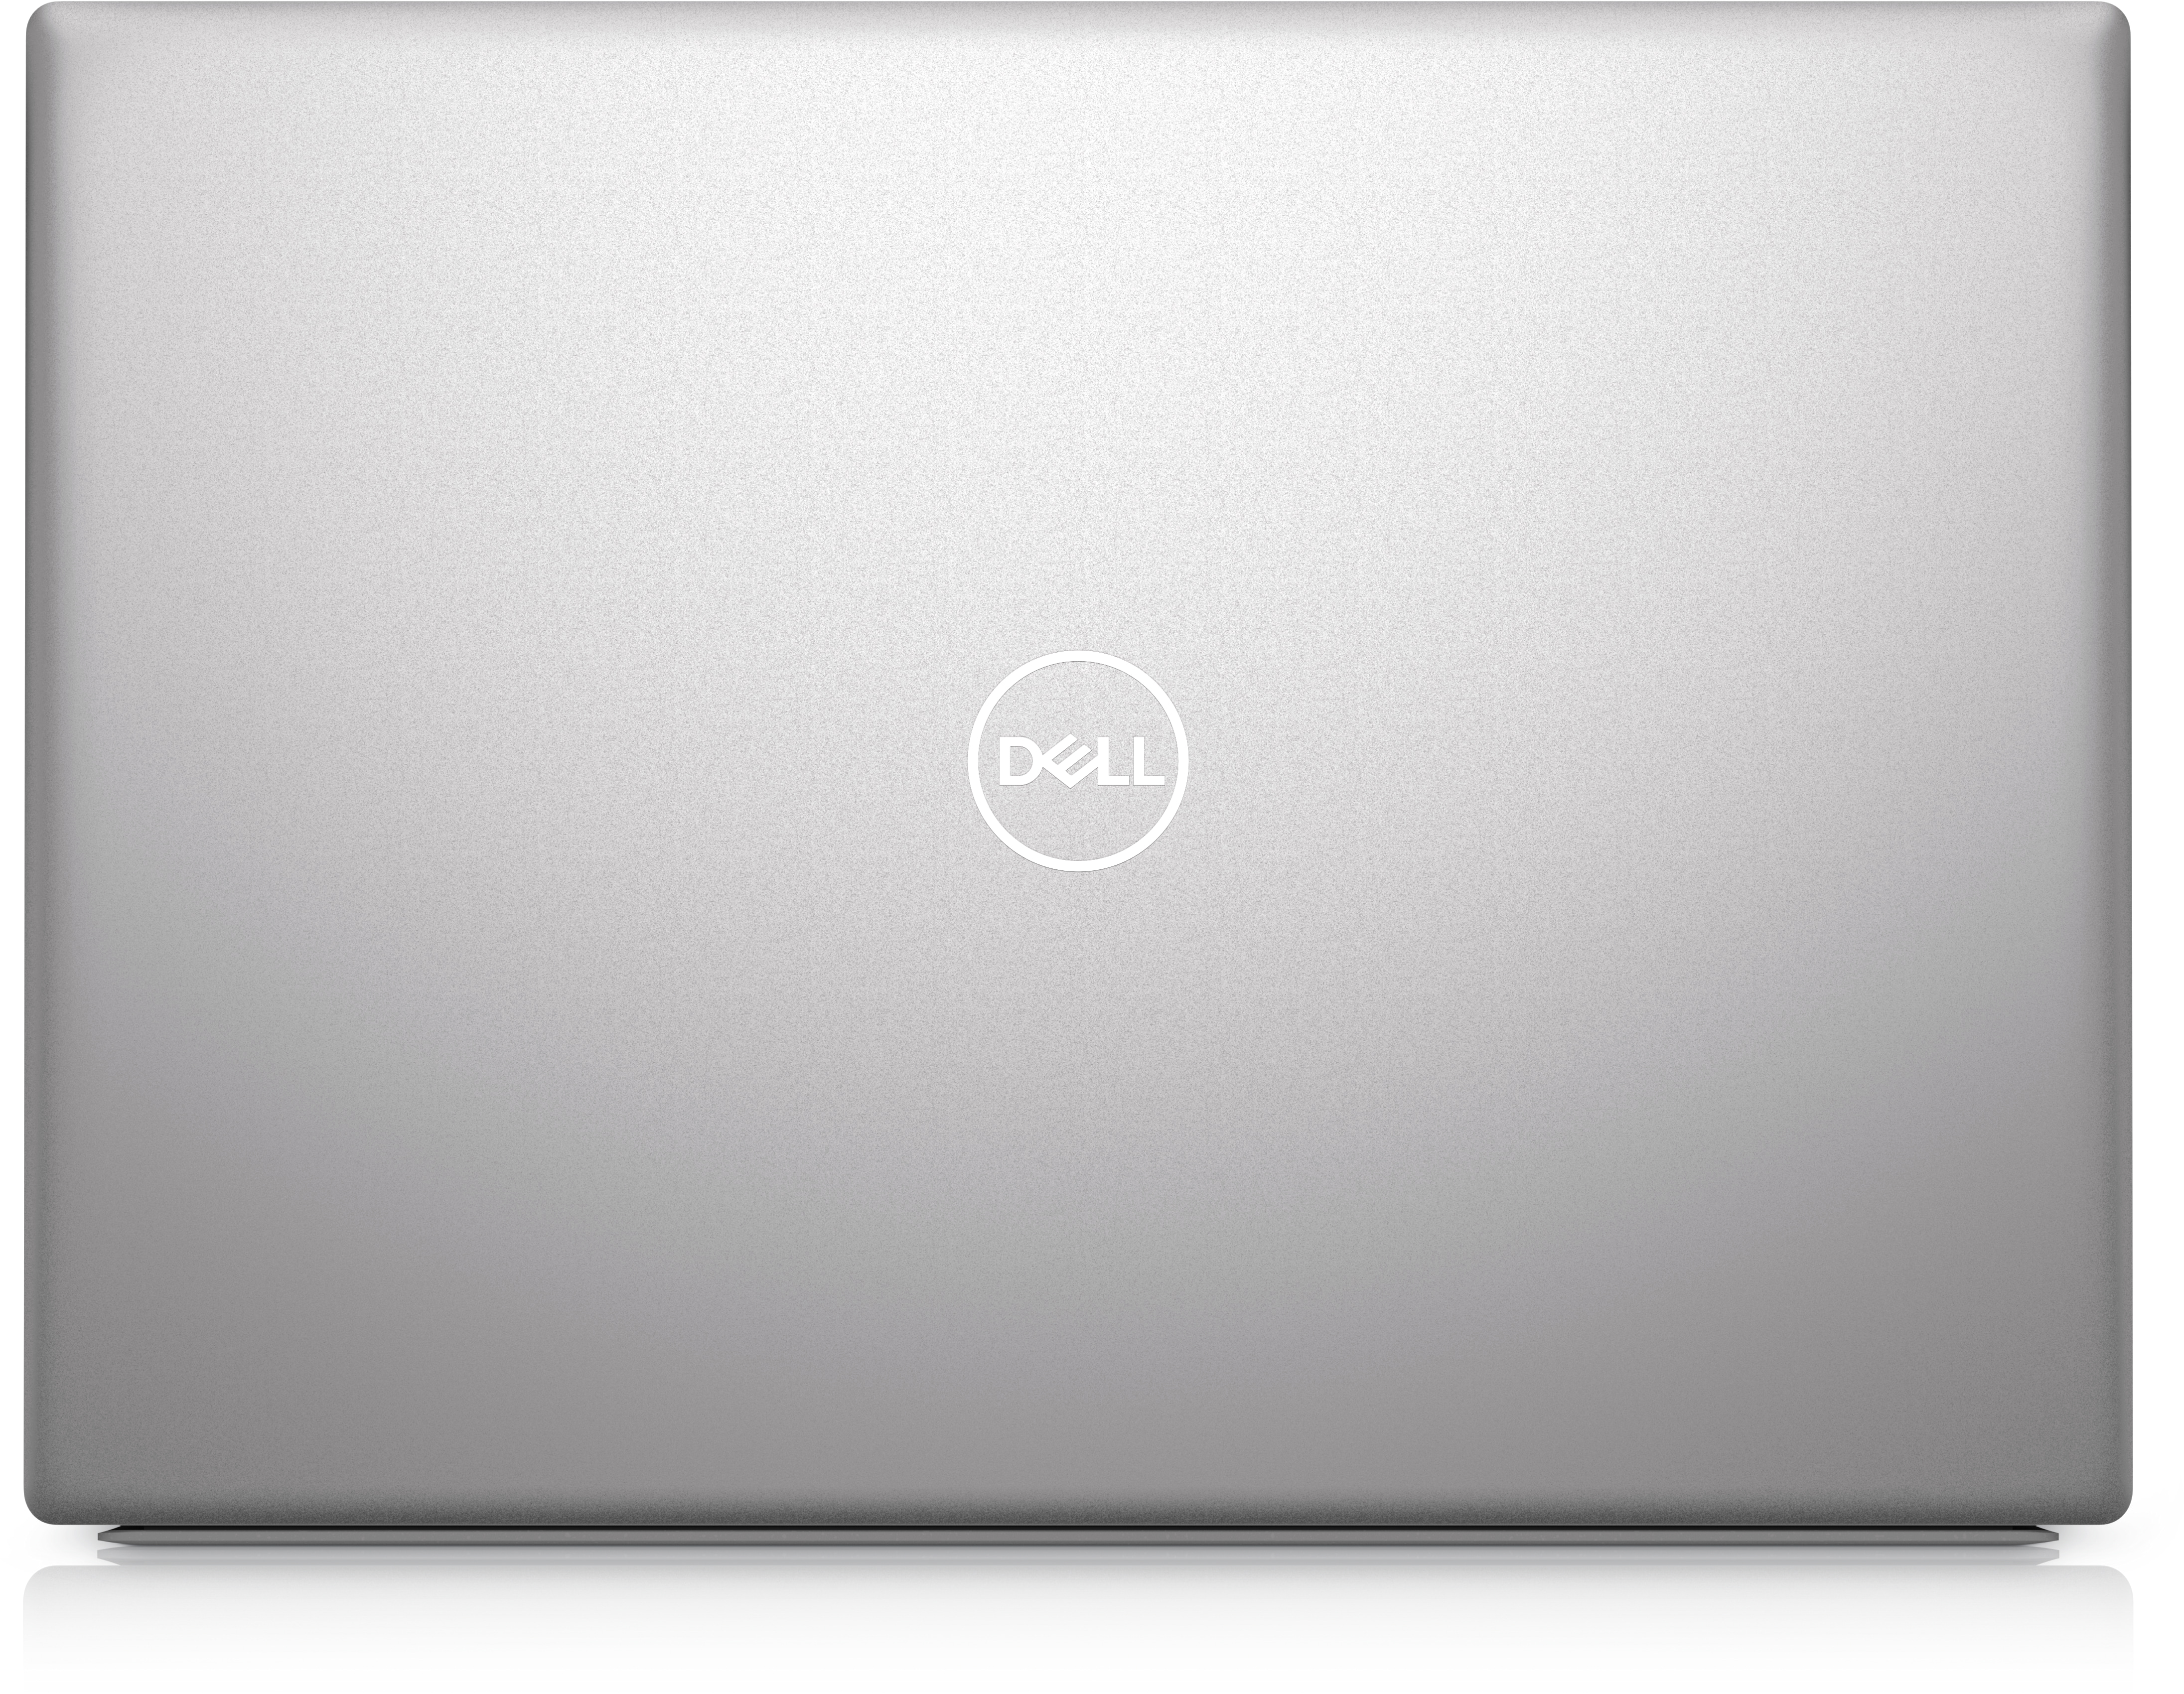 Inspiron 14-inch Laptop with AMD Mobile Processor | Dell USA